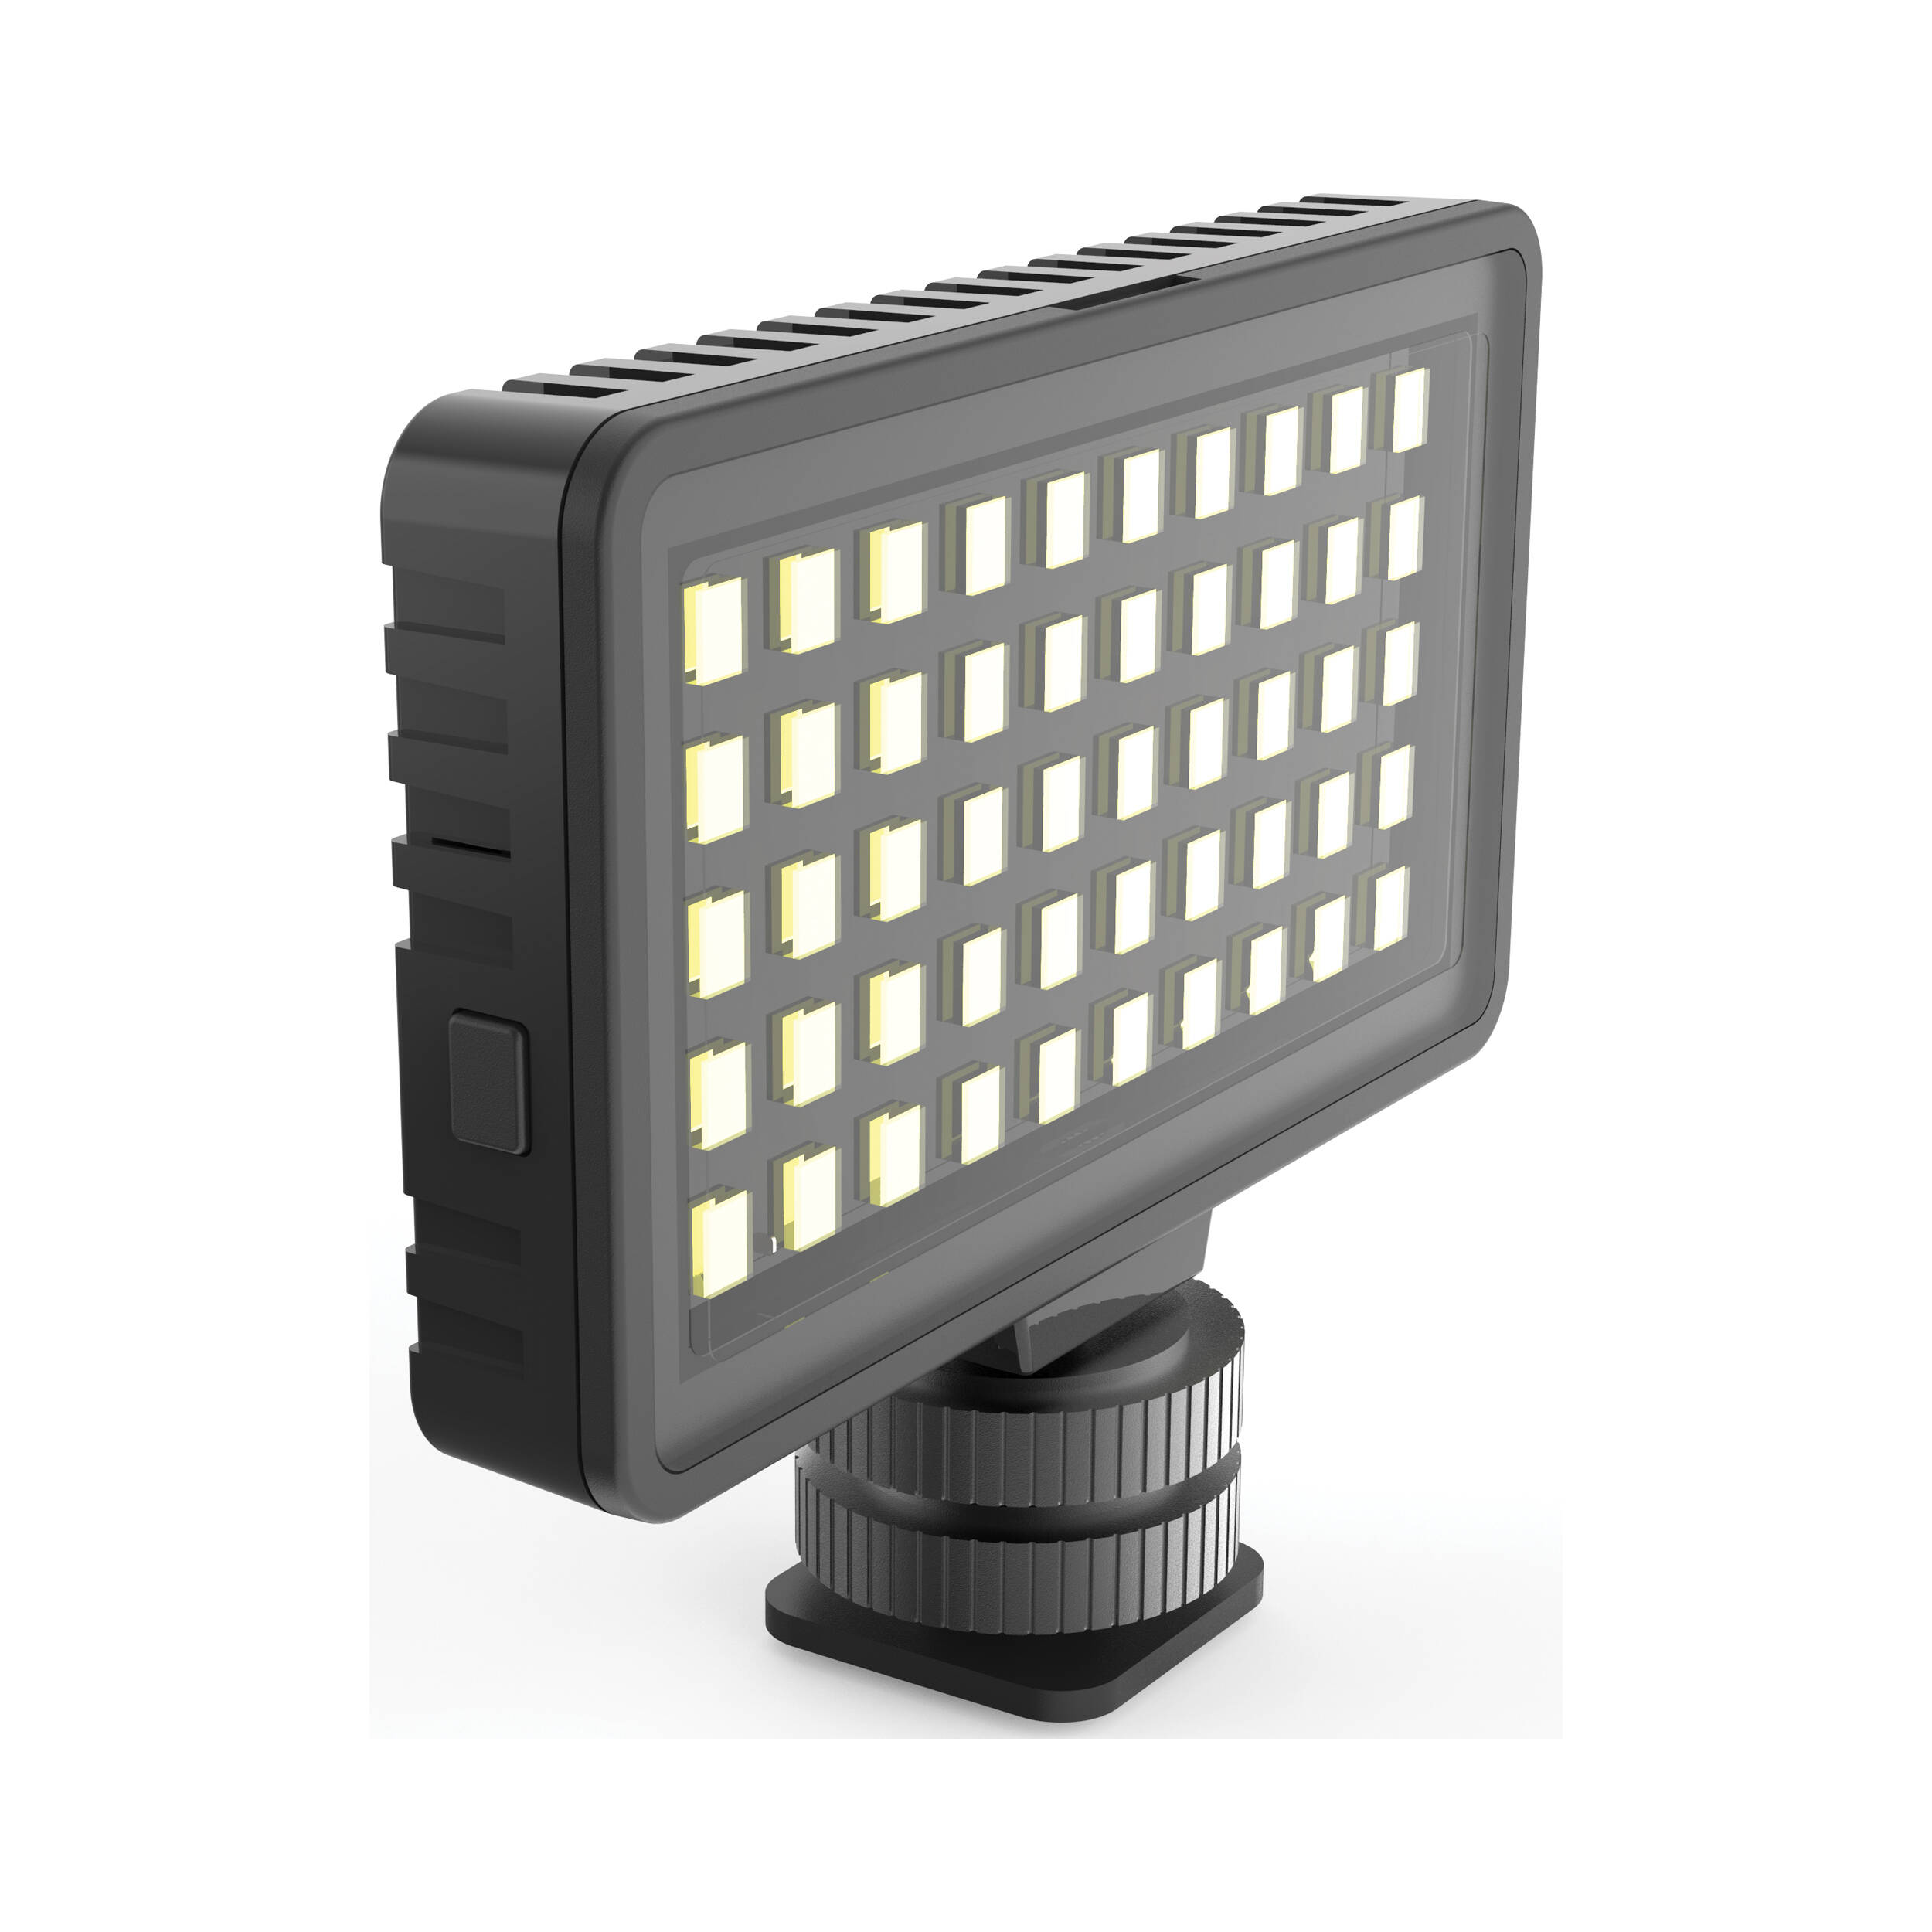 DigiPower InstaFame Super-Compact 50-LED Video Light with Phone Holder